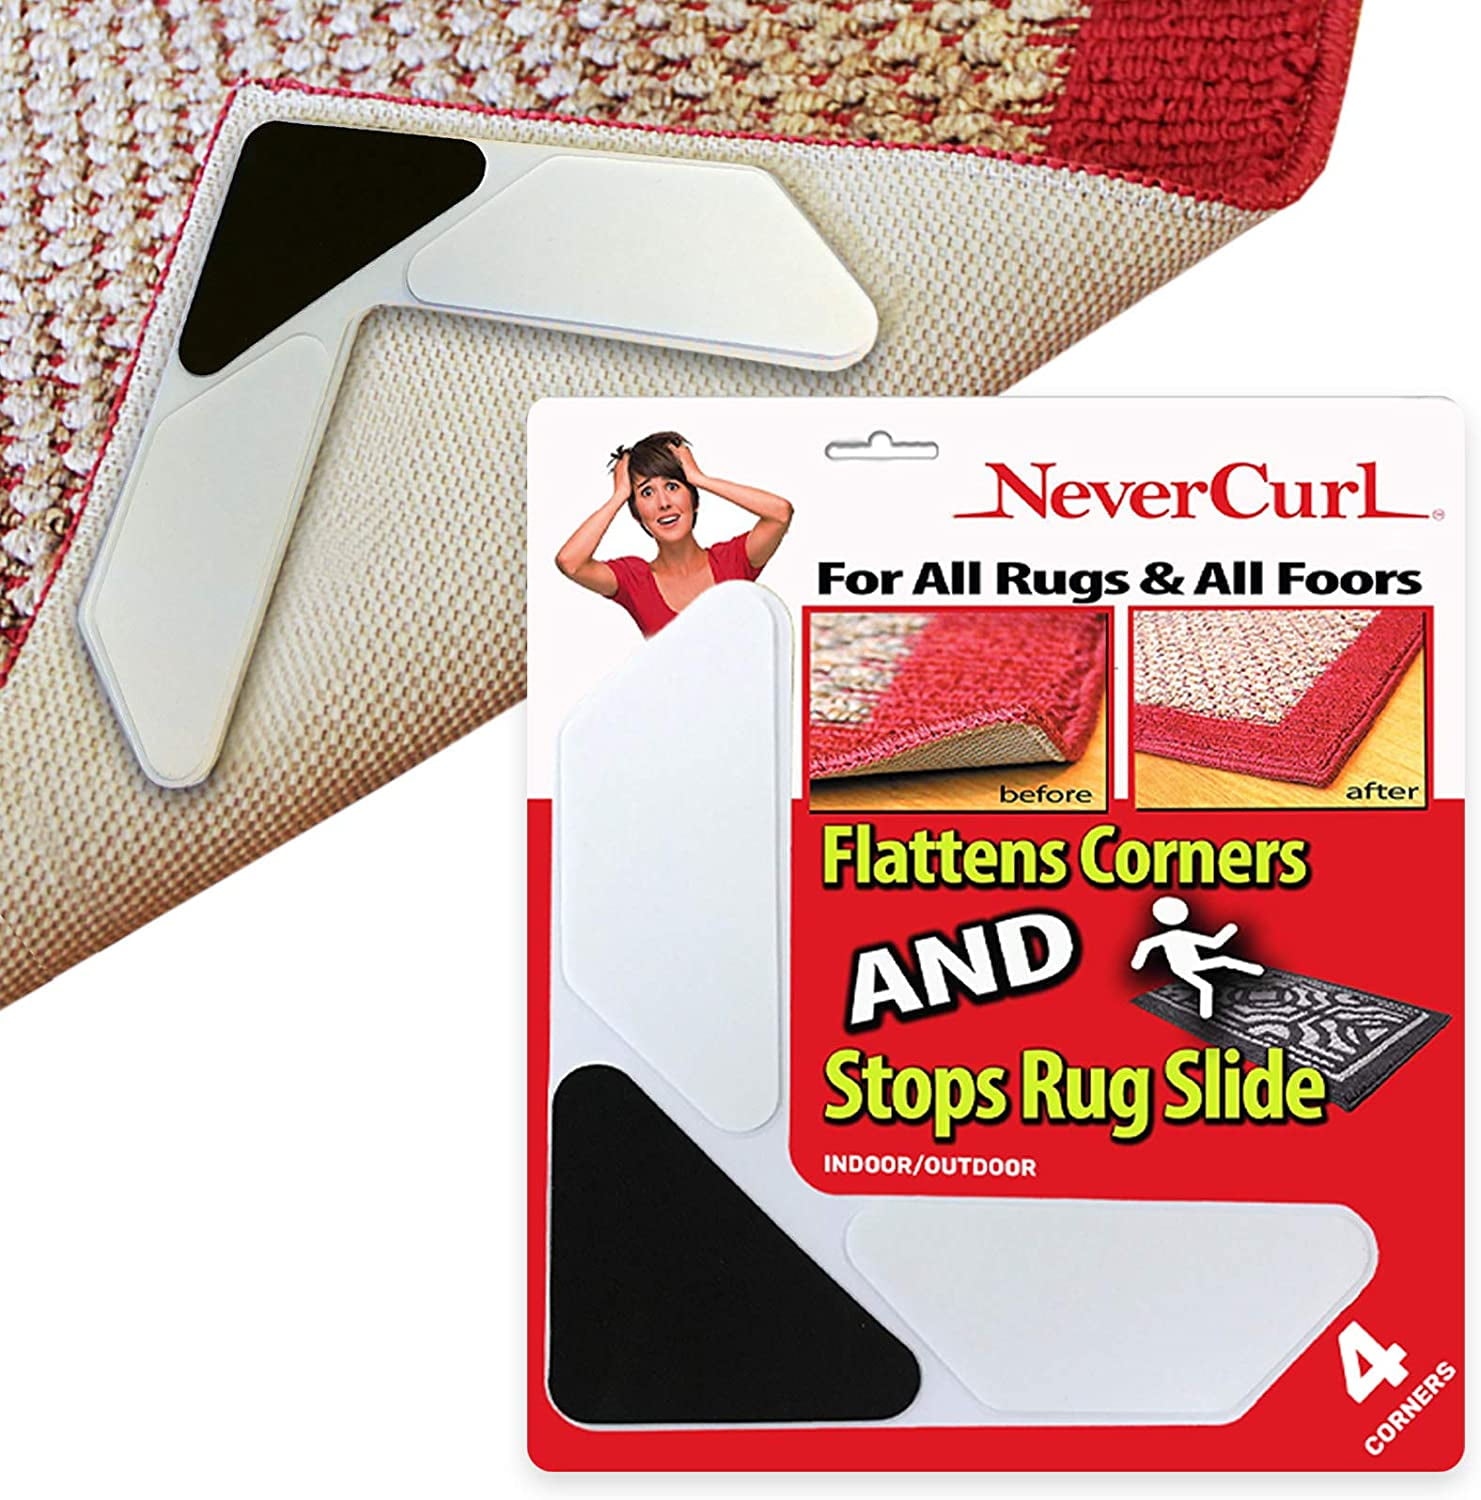 MY REVIEW ON THE RUG GRIPPERS - Decorate with Tip and More